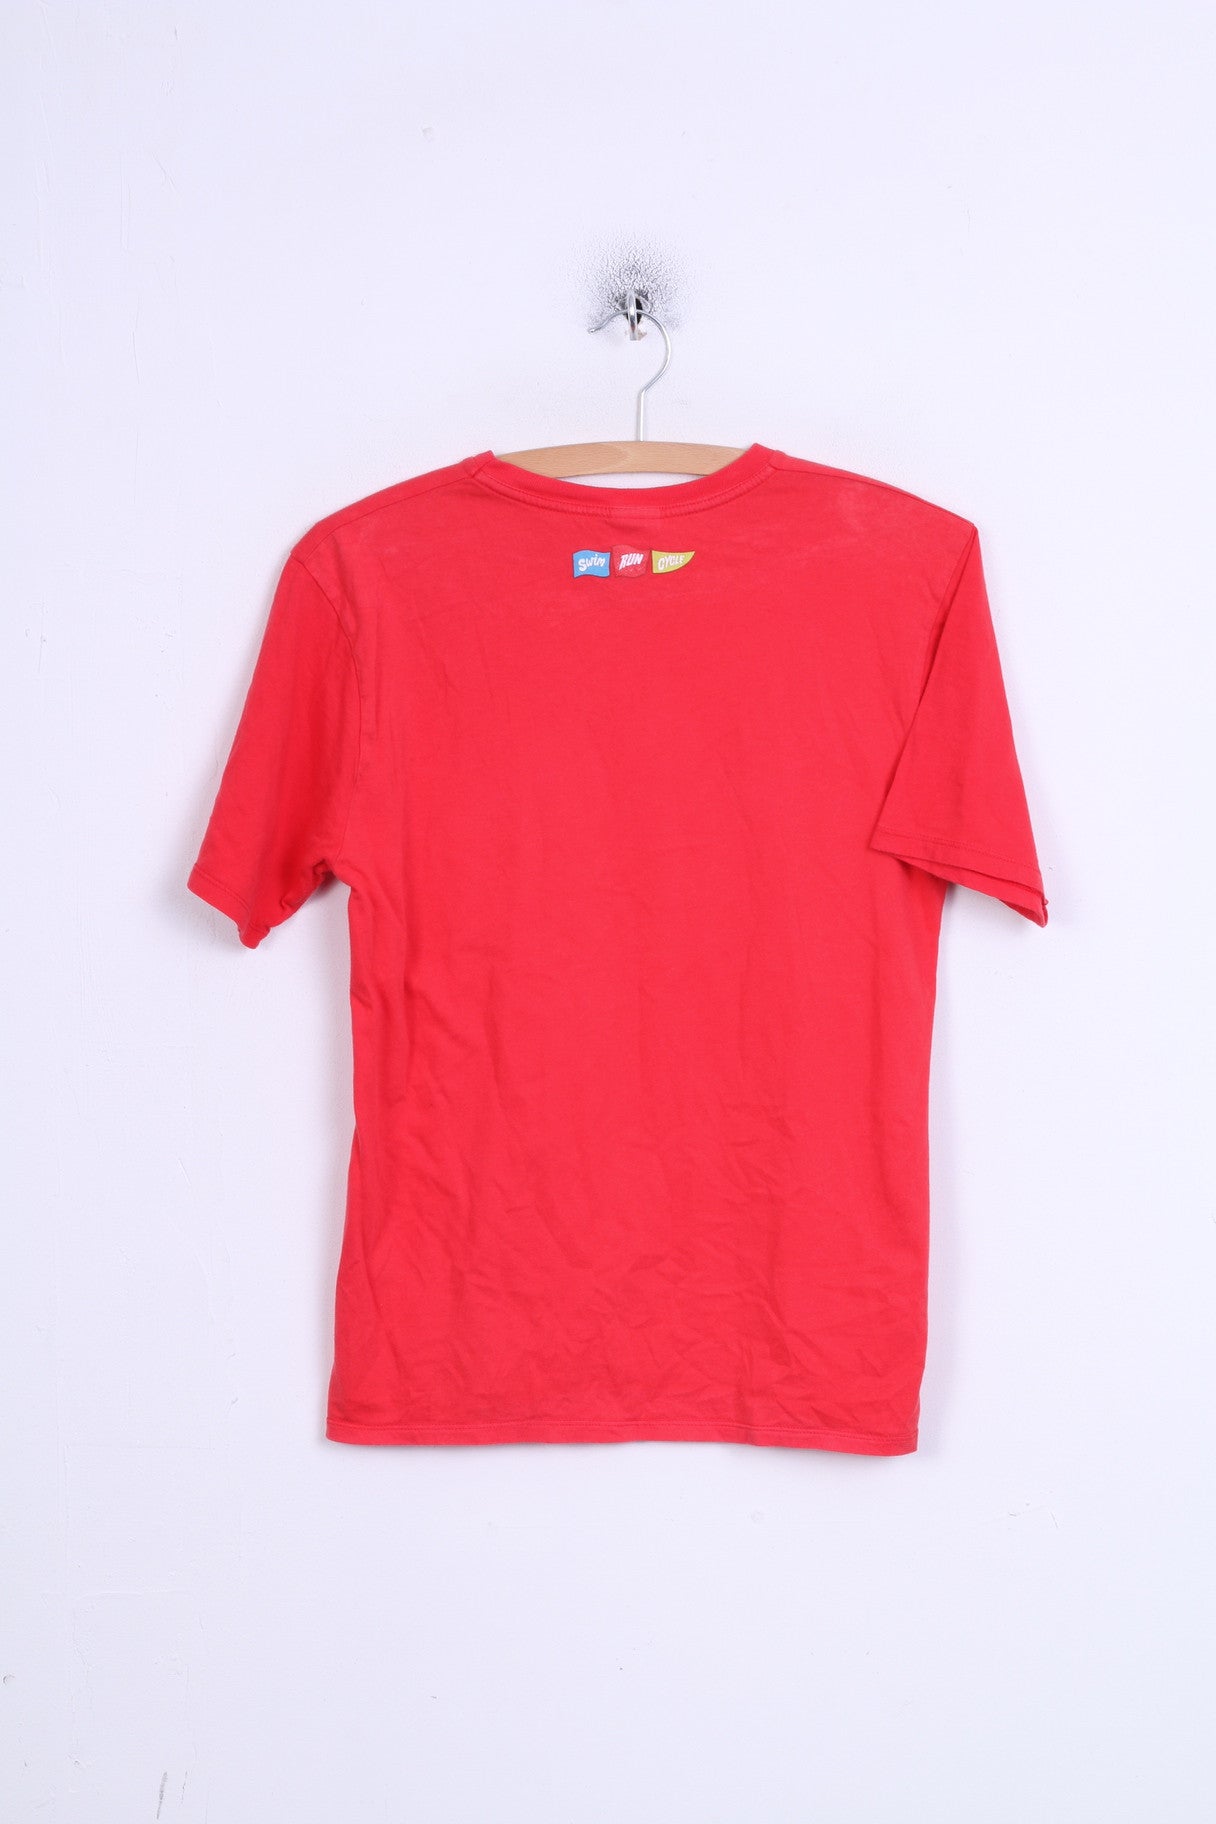 Sport Relief 2014 Womens XS T-Shirt Red Crew Neck Cotton Swim Run Cycle